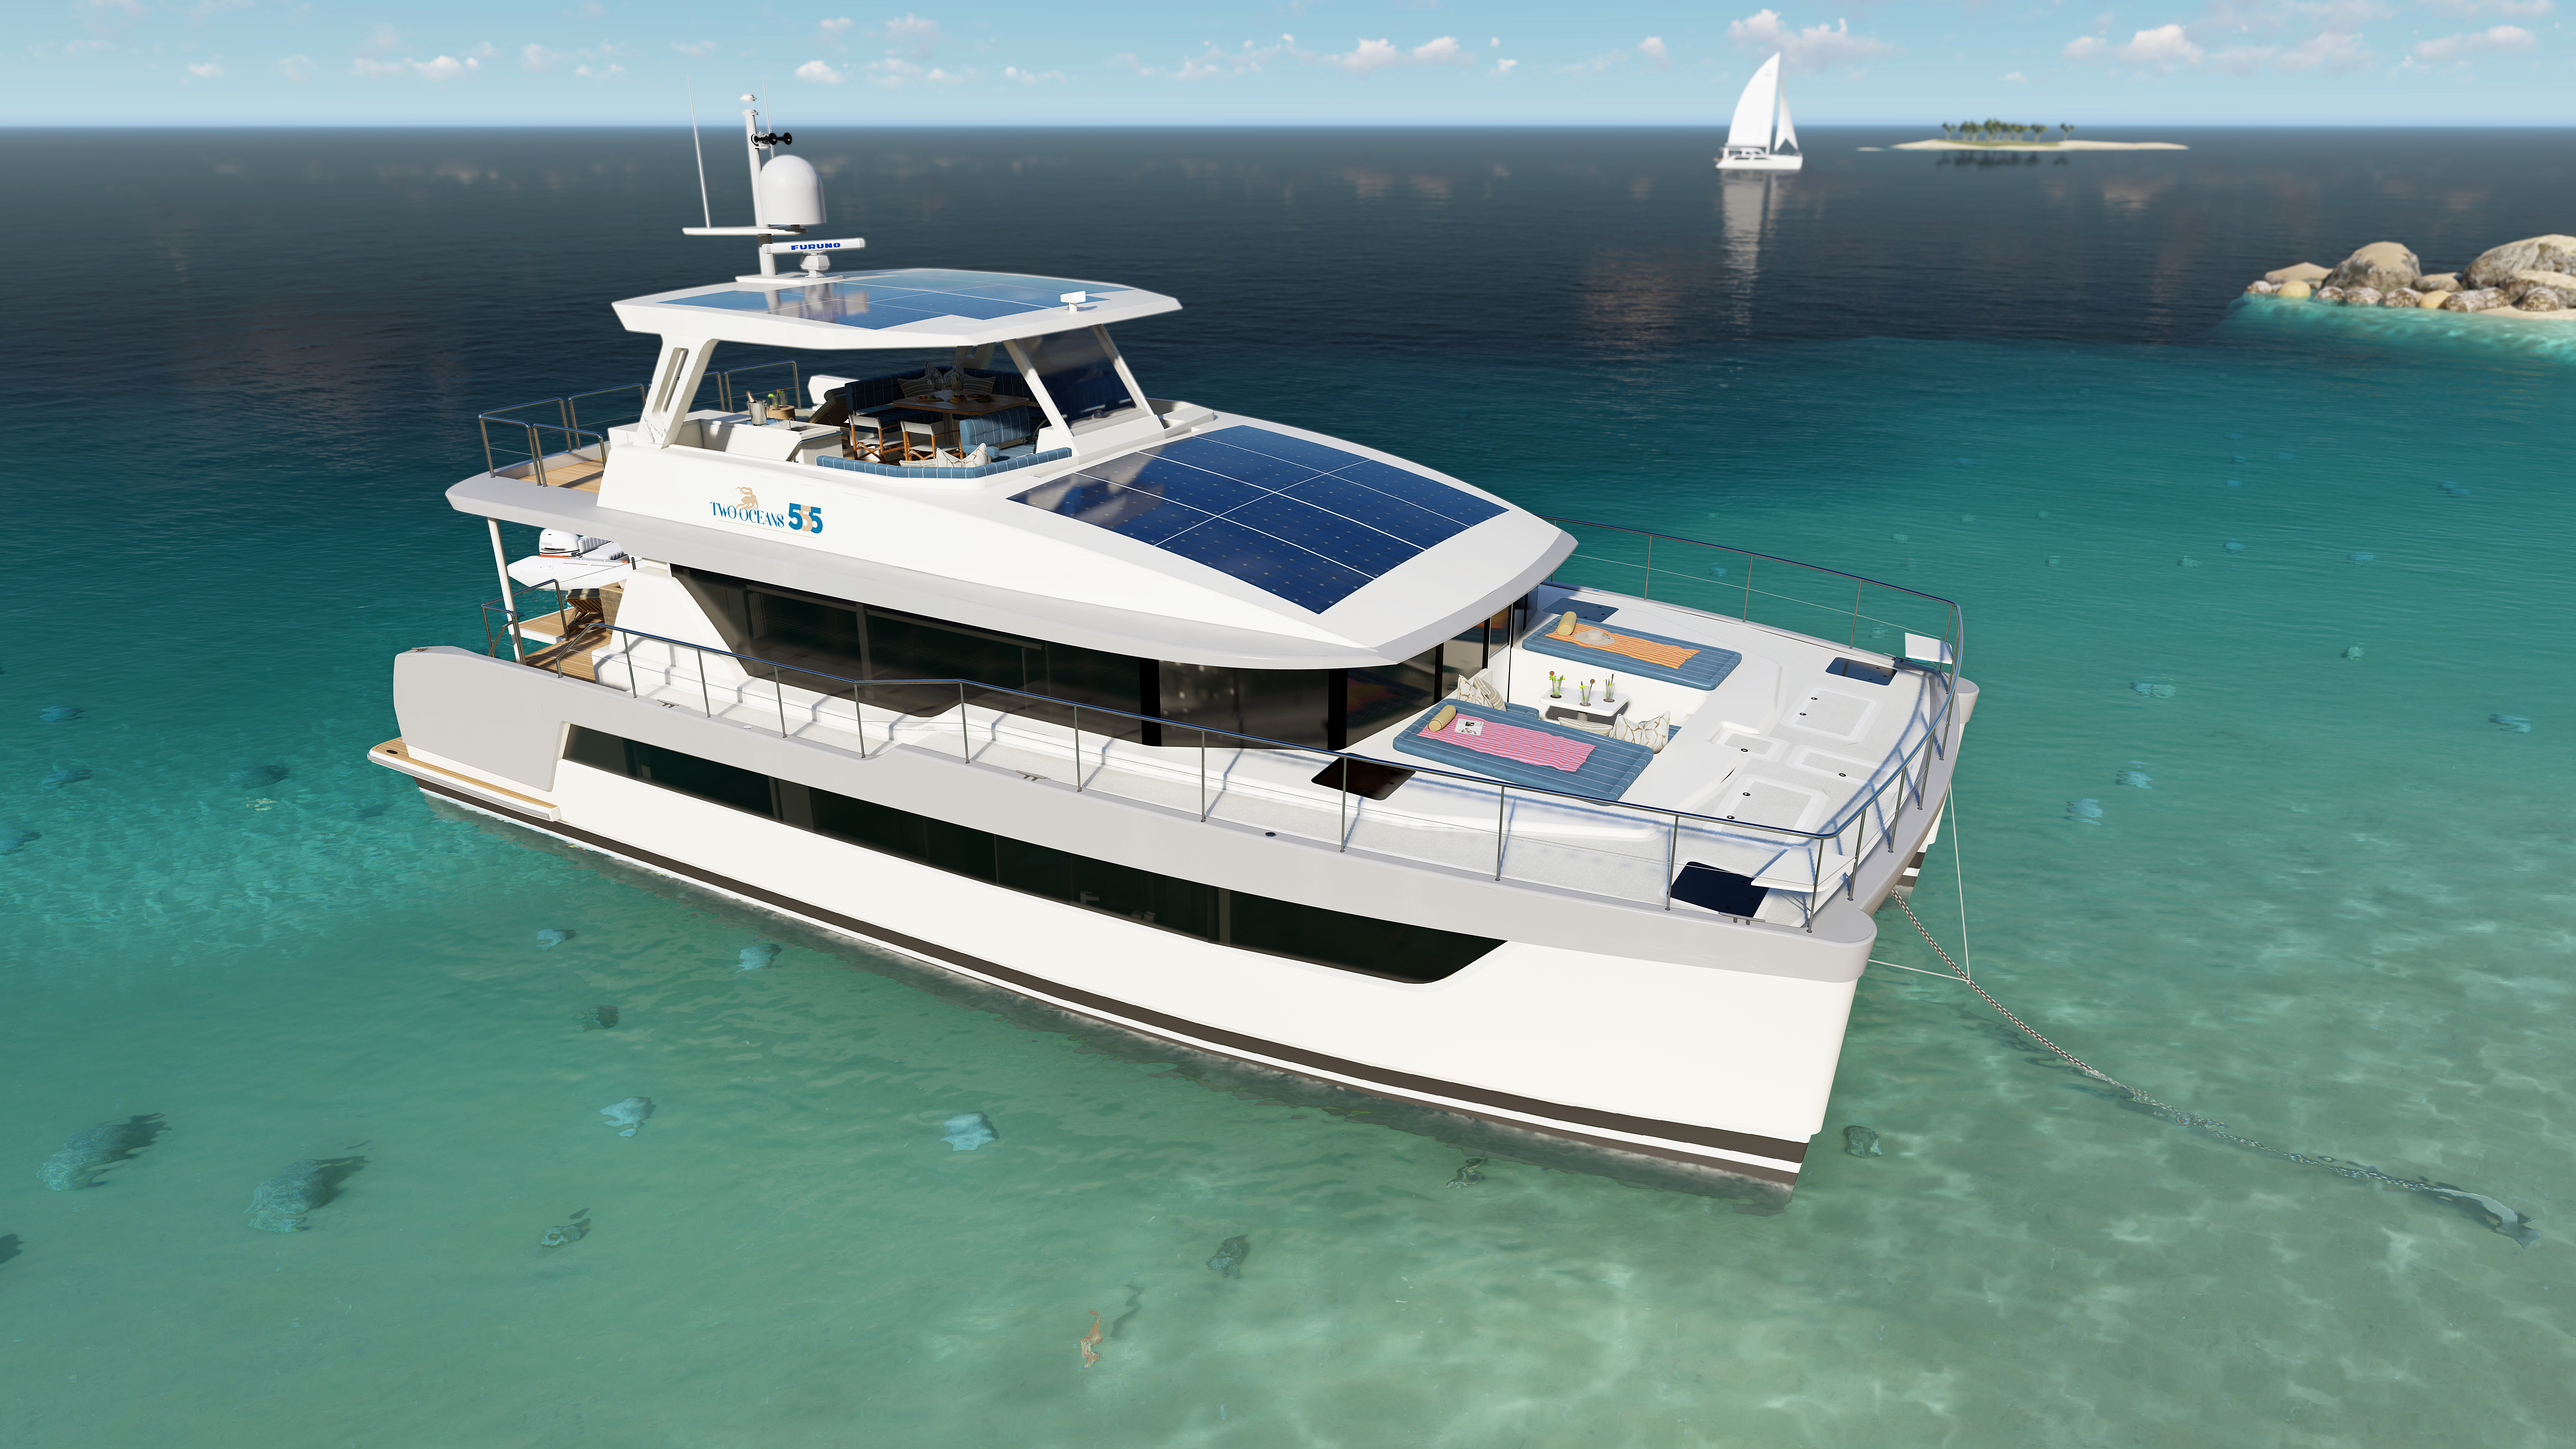 HMY Introduces the Two Oceans 555 Power Catamaran